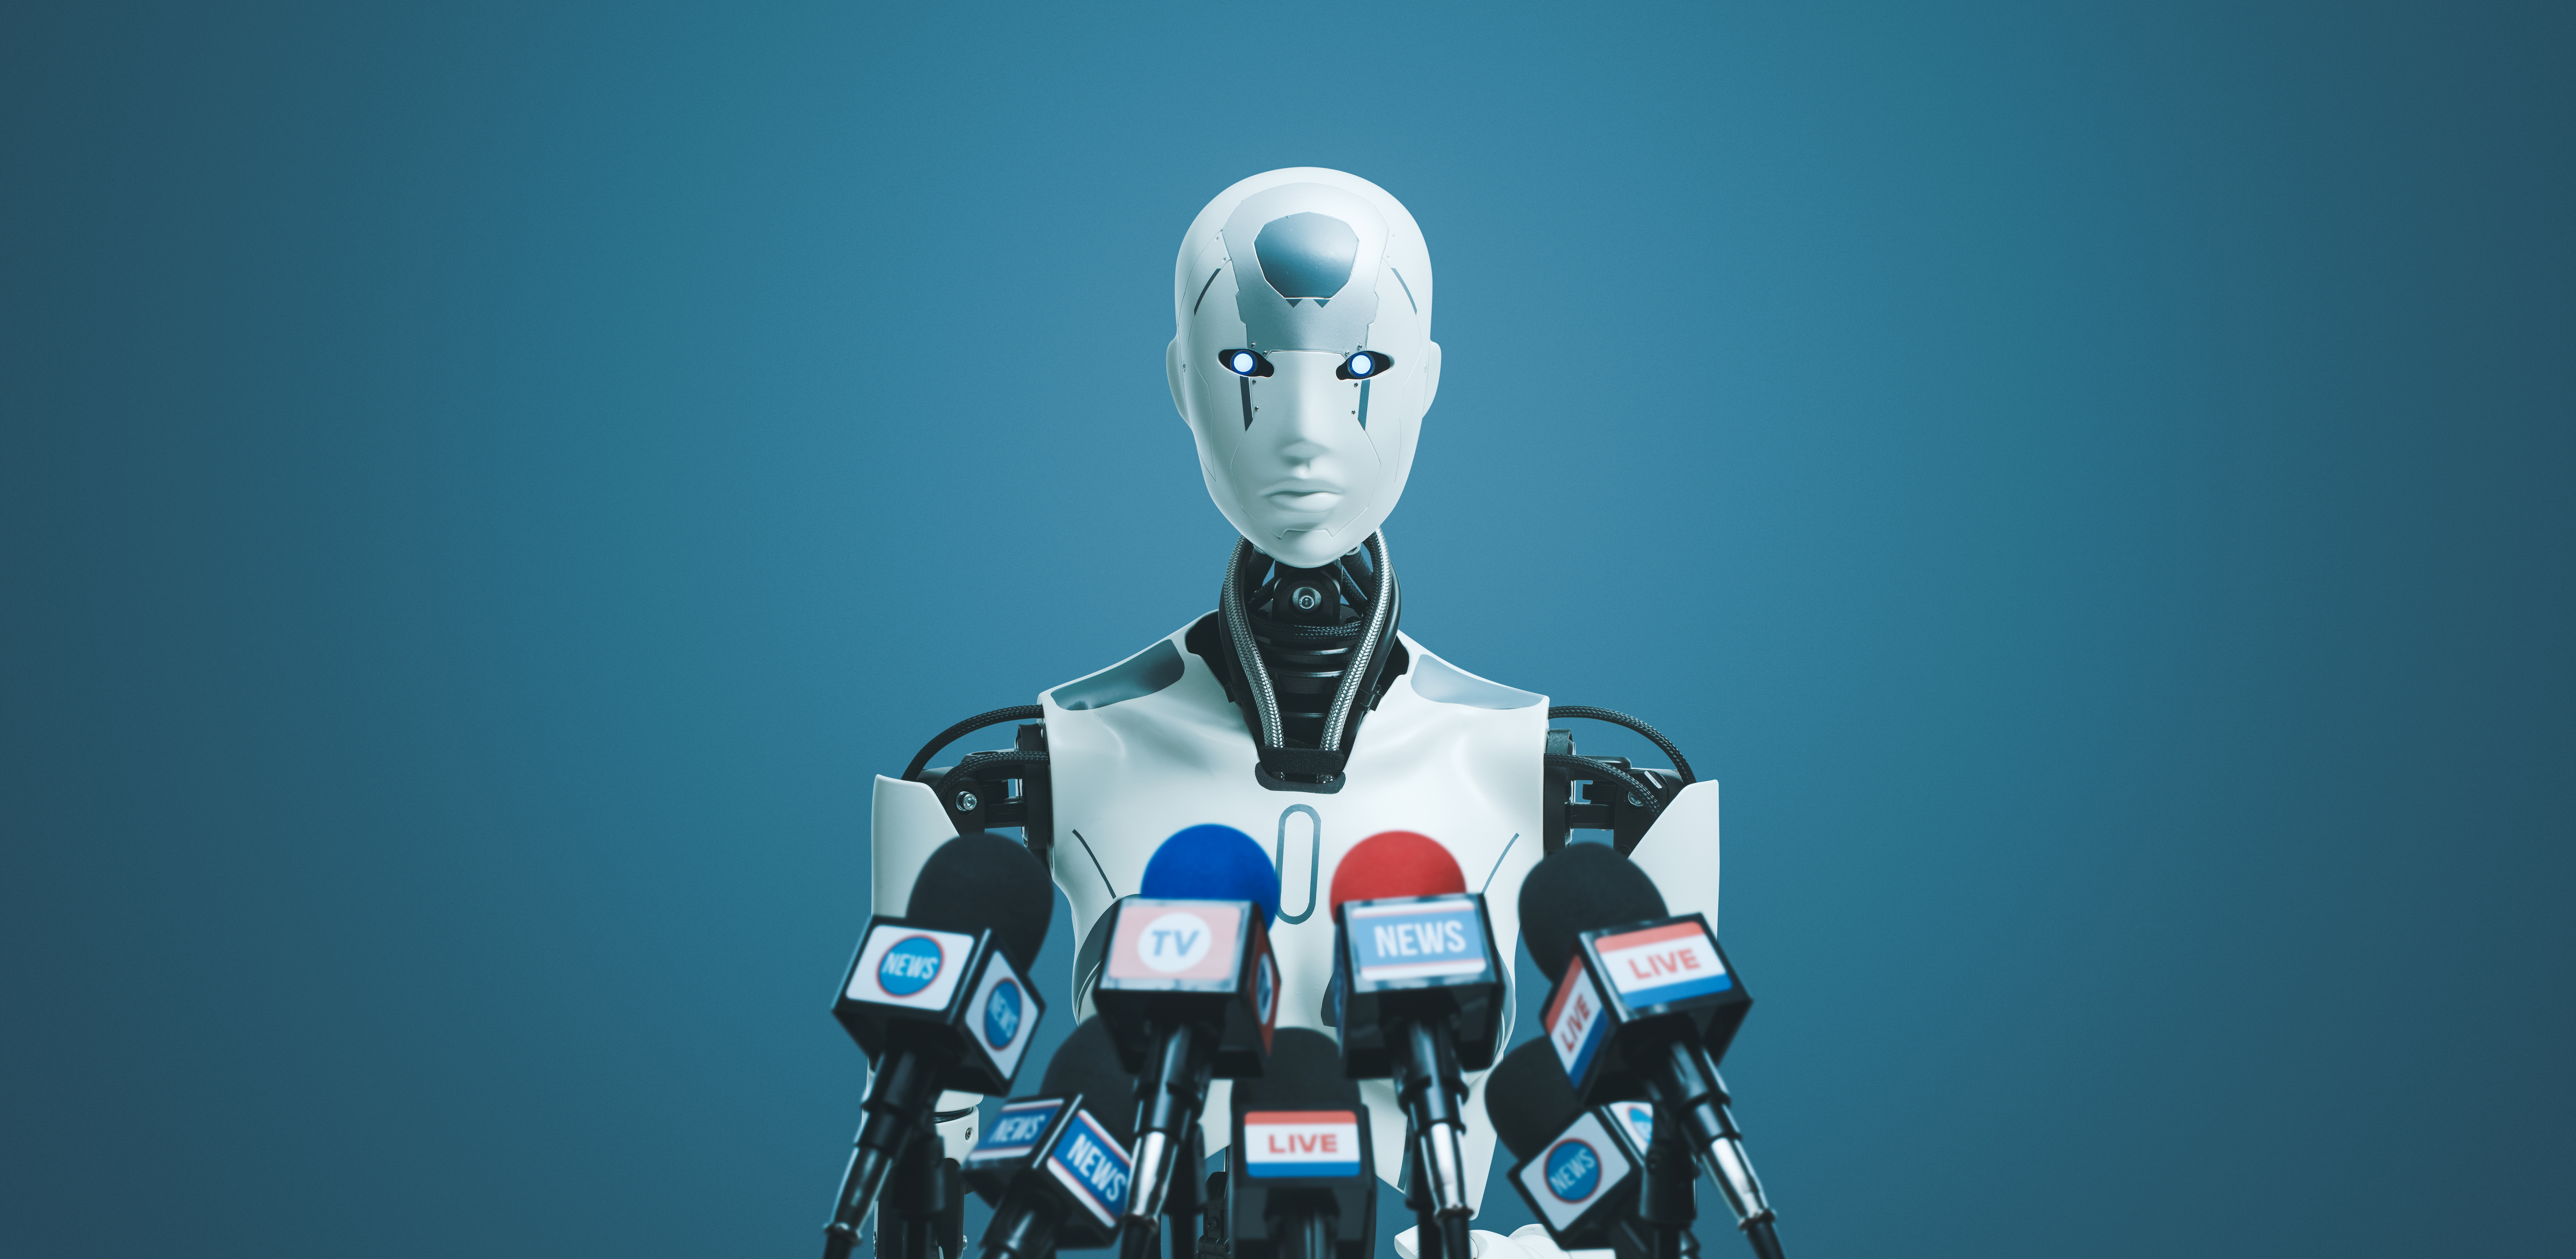 5 Reasons Why AI is Bad for Journalism